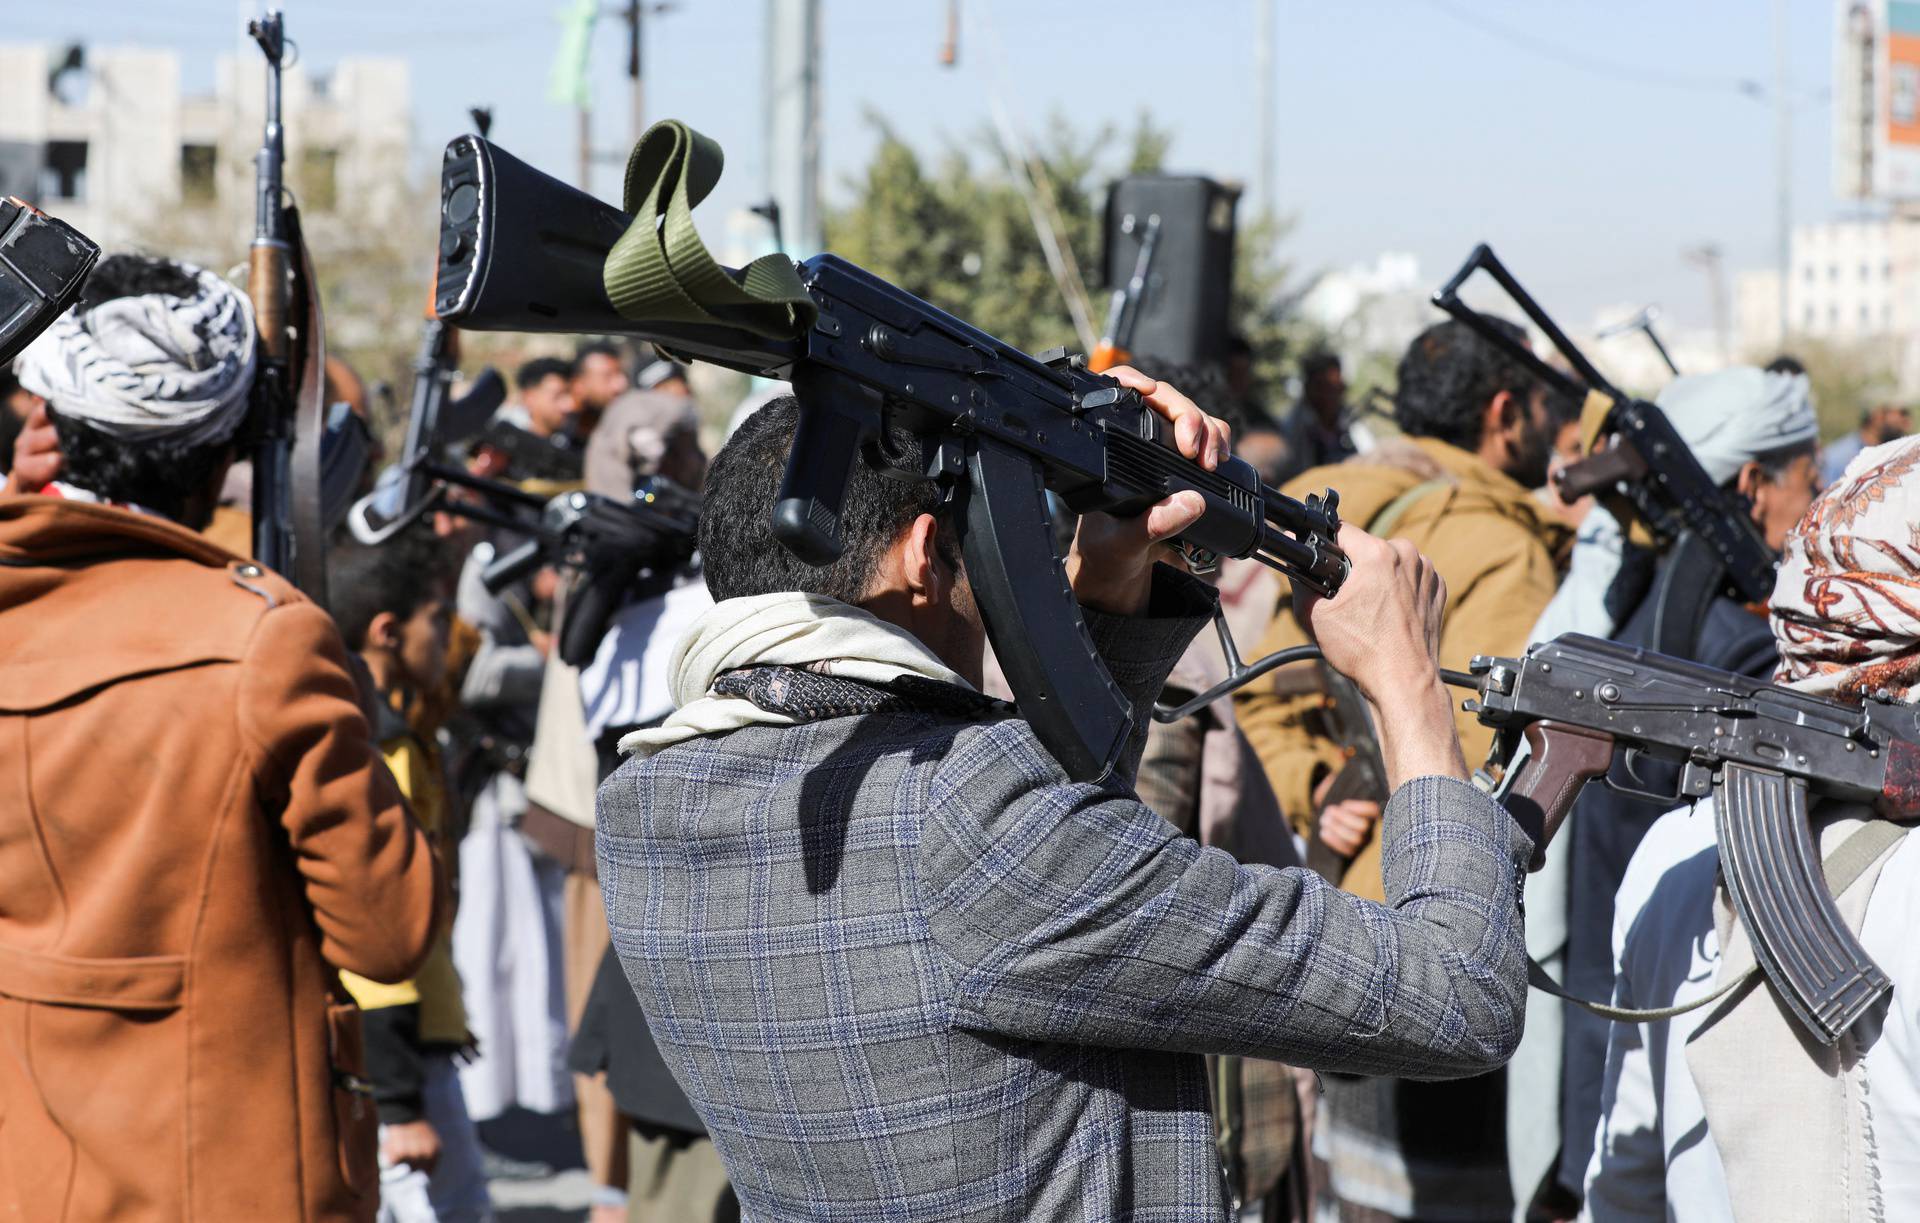 Newly recruited Houthi fighters hold up firearms during a ceremony at the end of their training in Sanaa